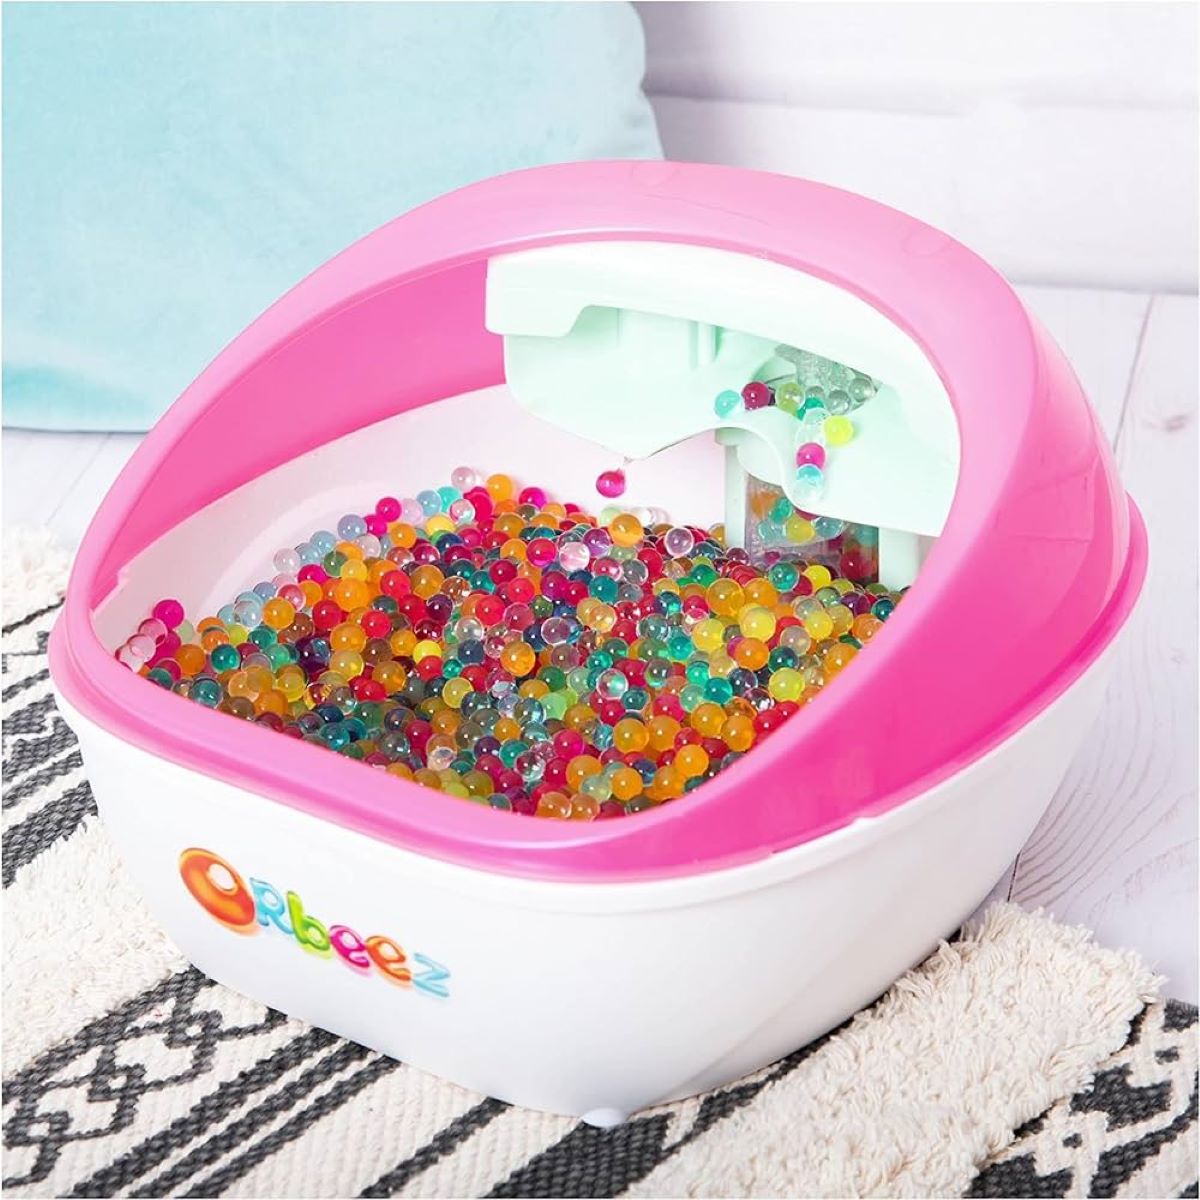 What Batteries Does The Orbeez Foot Spa Take